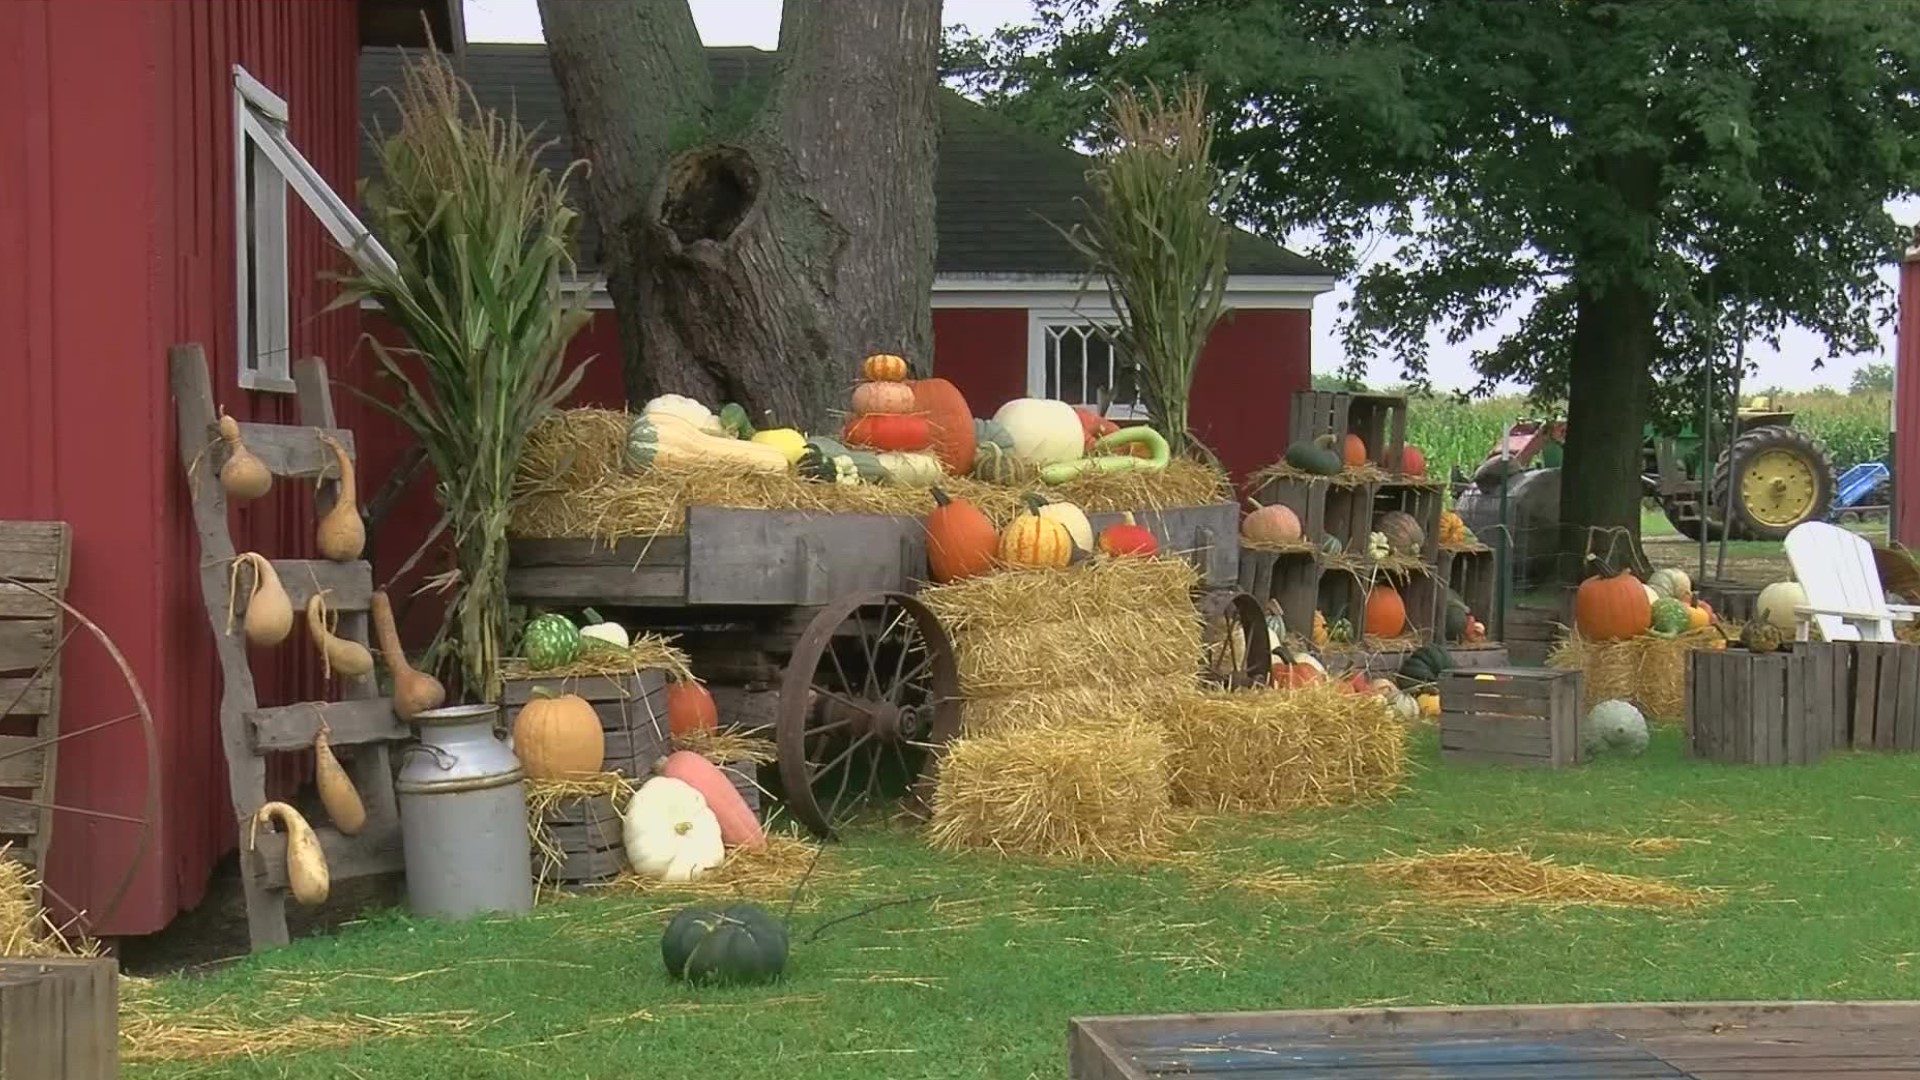 Enjoy the smells of donuts and fall favorites, walking through a maze and taking hay rides at Fleitz Pumpkin Farm in Oregon.